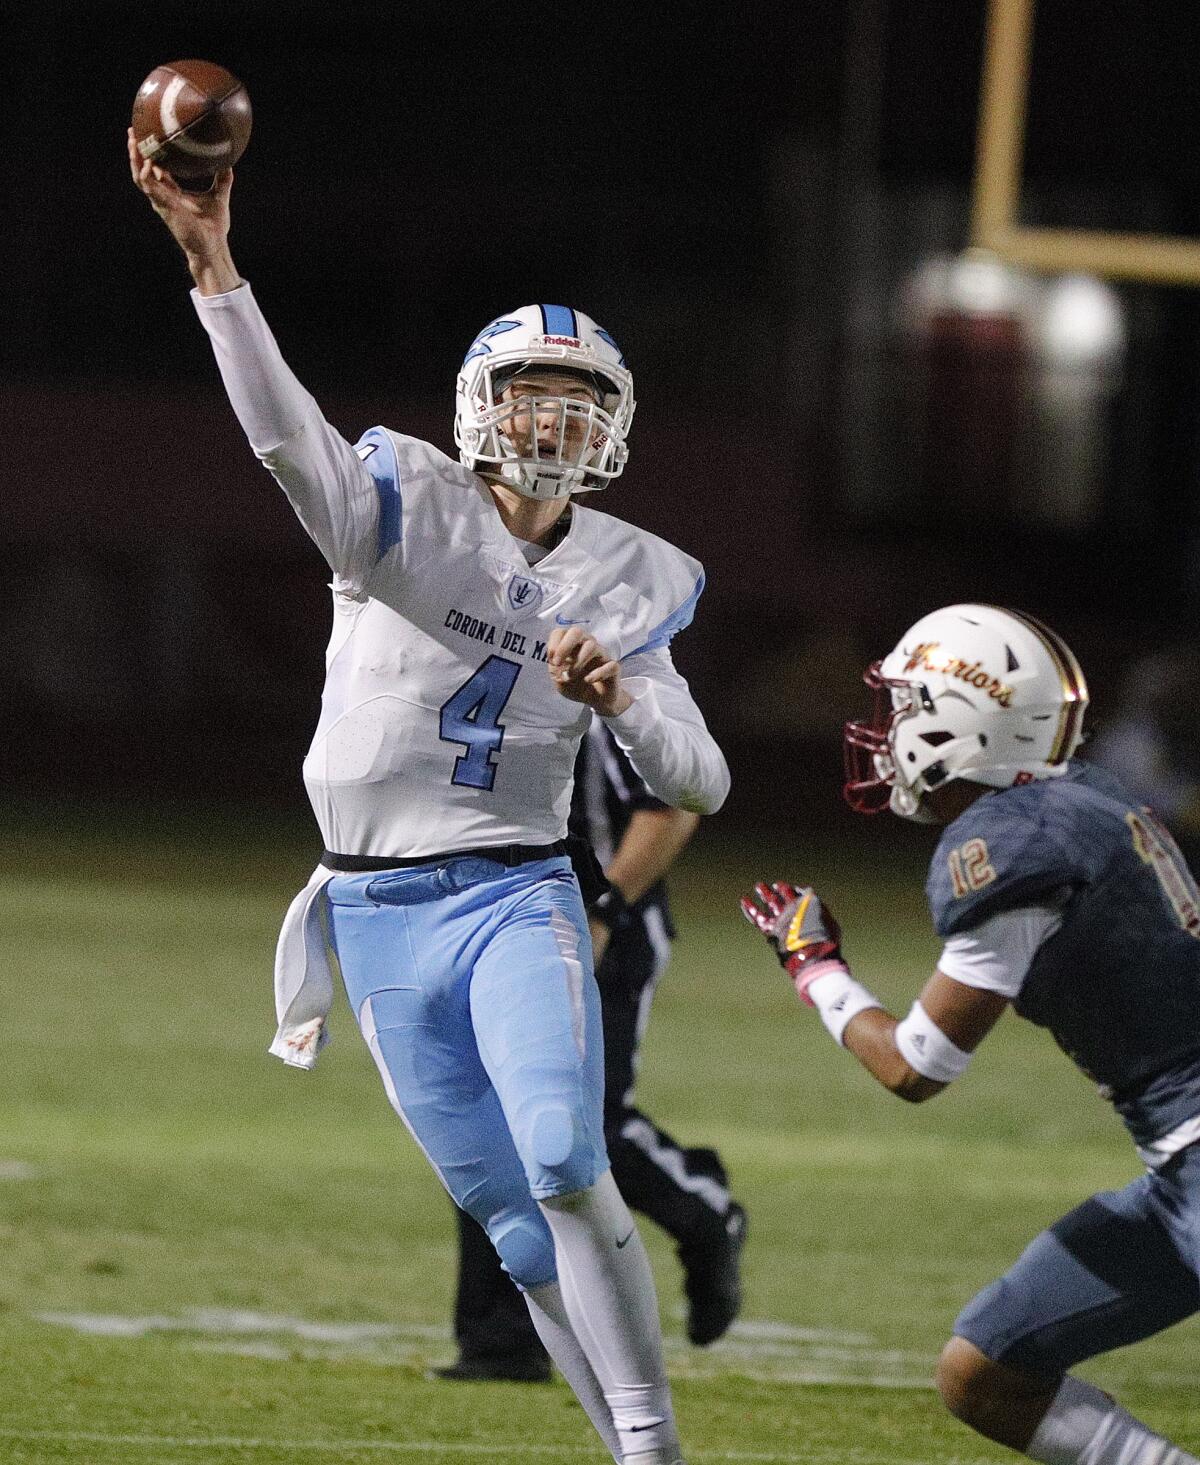 Corona del Mar's Ethan Garbers scrambles and throws a pass in a CIF Southern Section Division 3 semifinal playoff game at Alemany High in Mission Hills on Nov. 22.